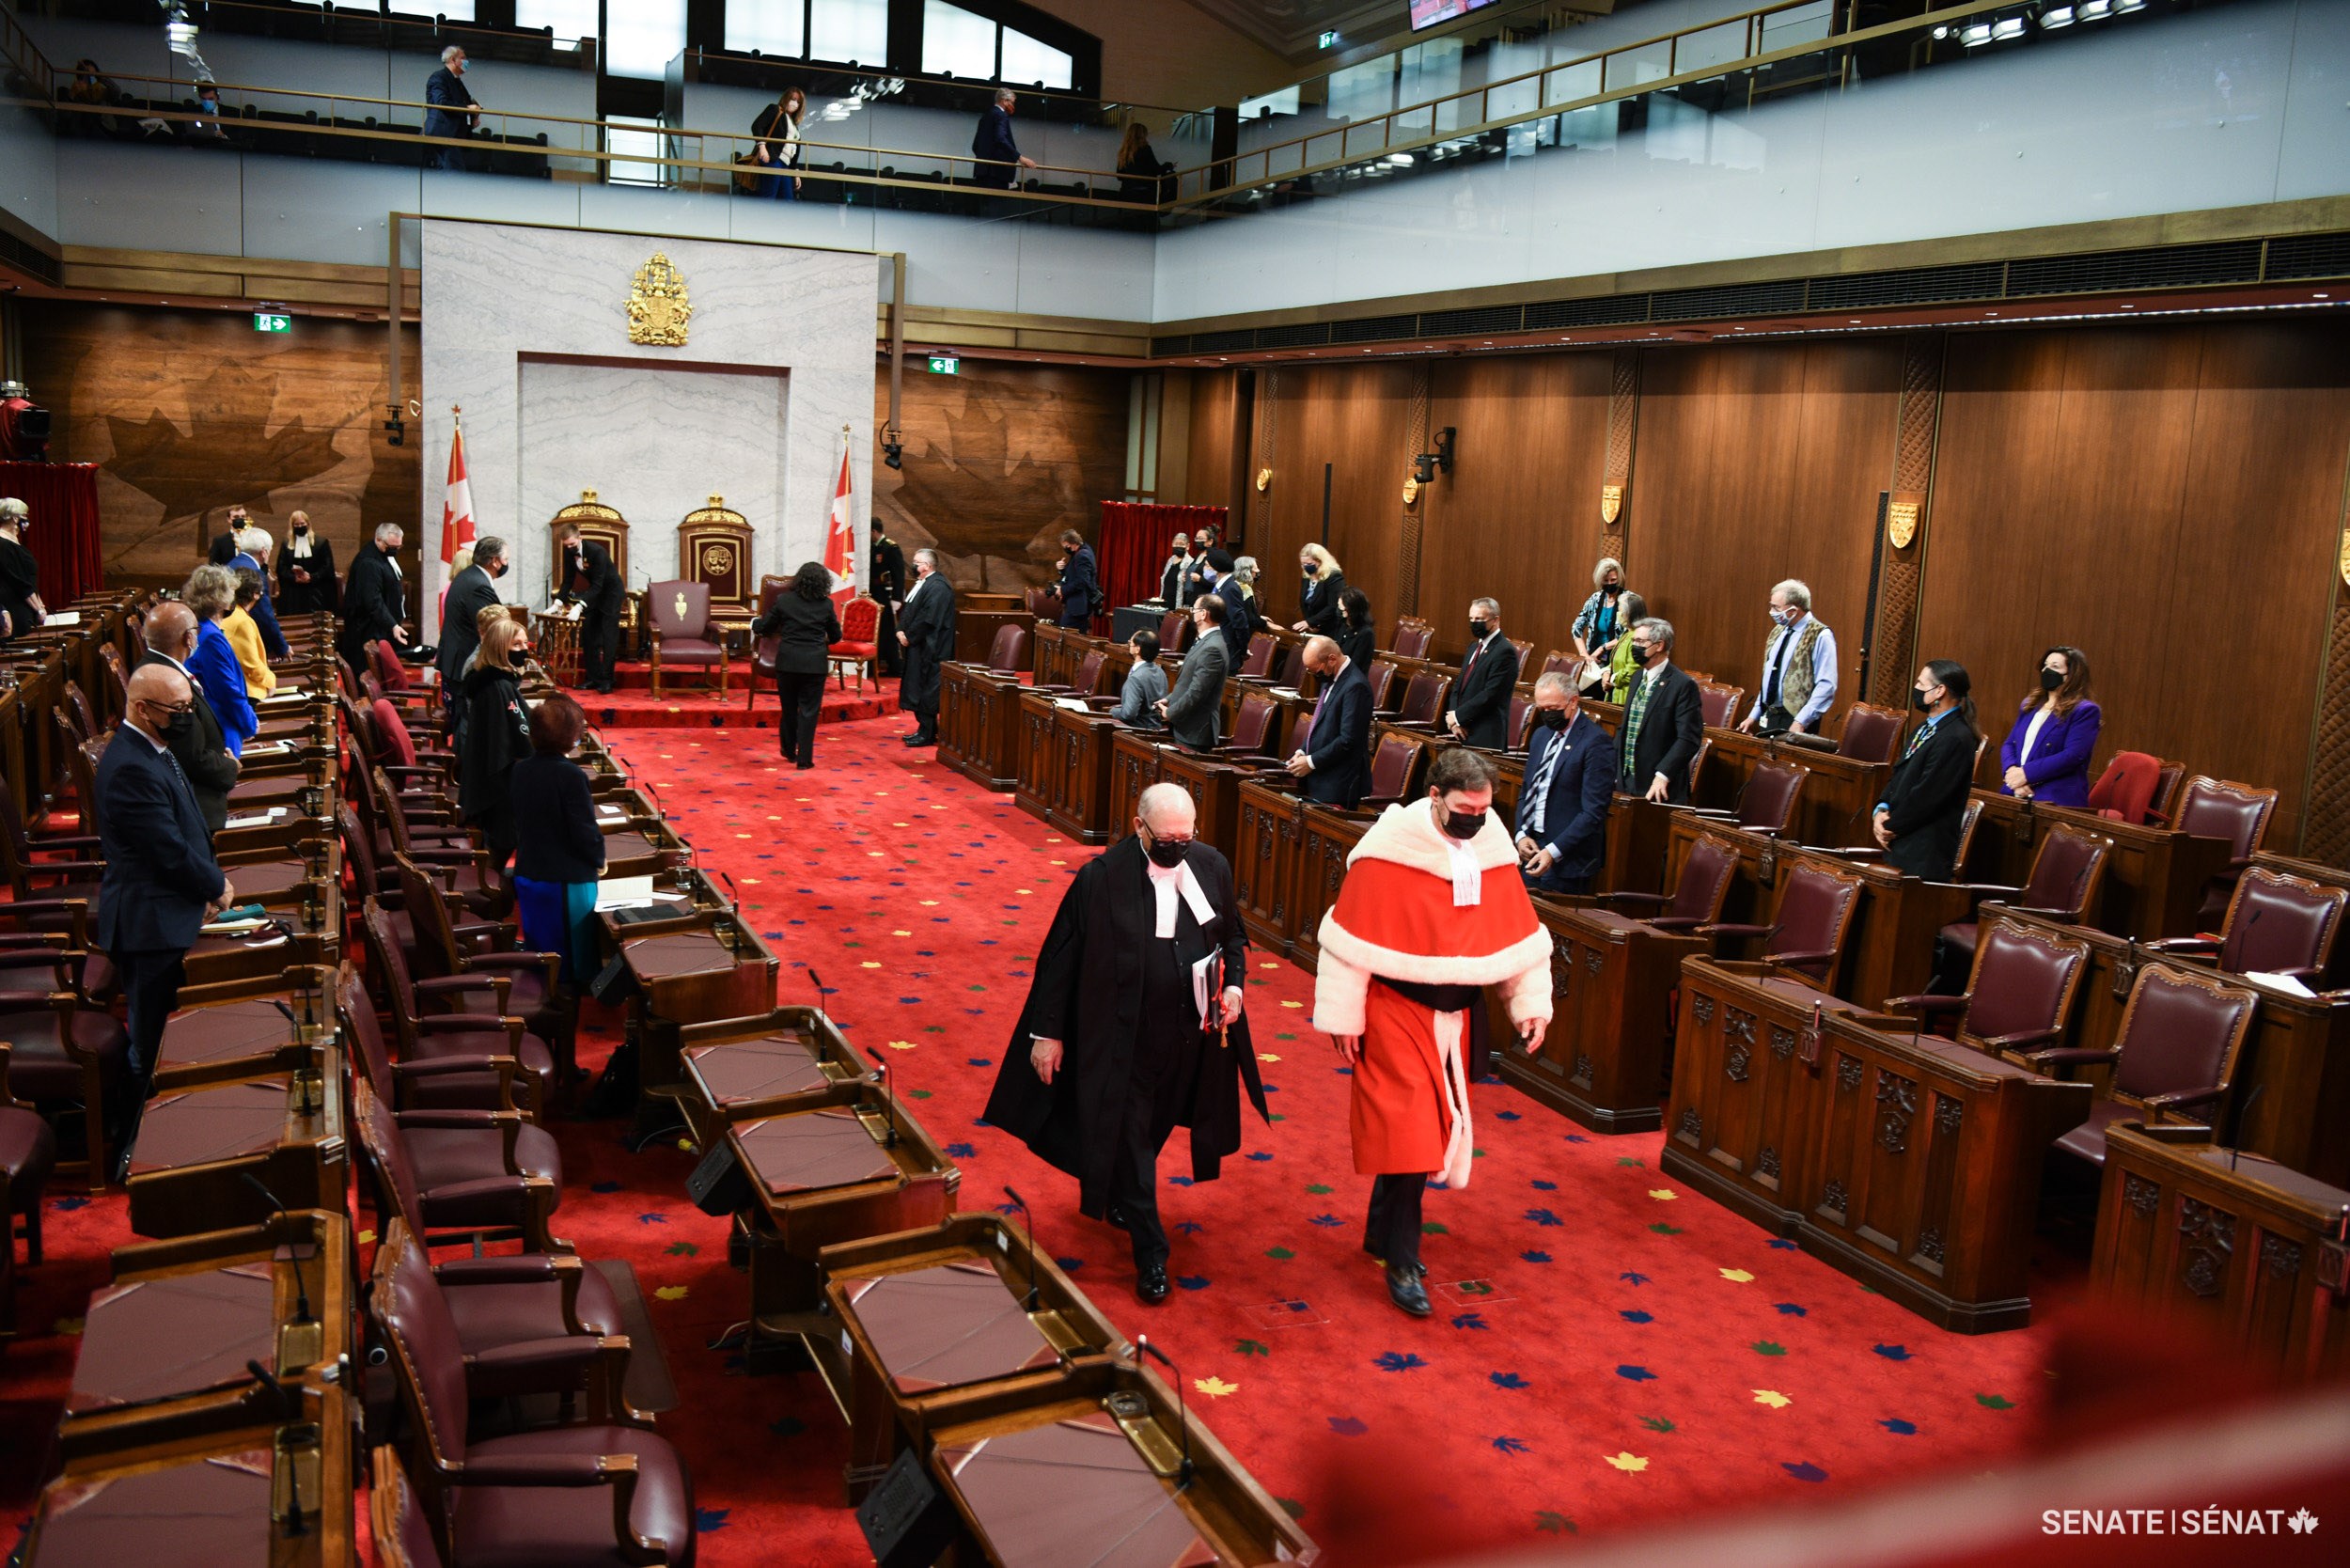 Speaker of the Senate George J. Furey leaves the Chamber with Chief Justice of Canada Richard Wagner.